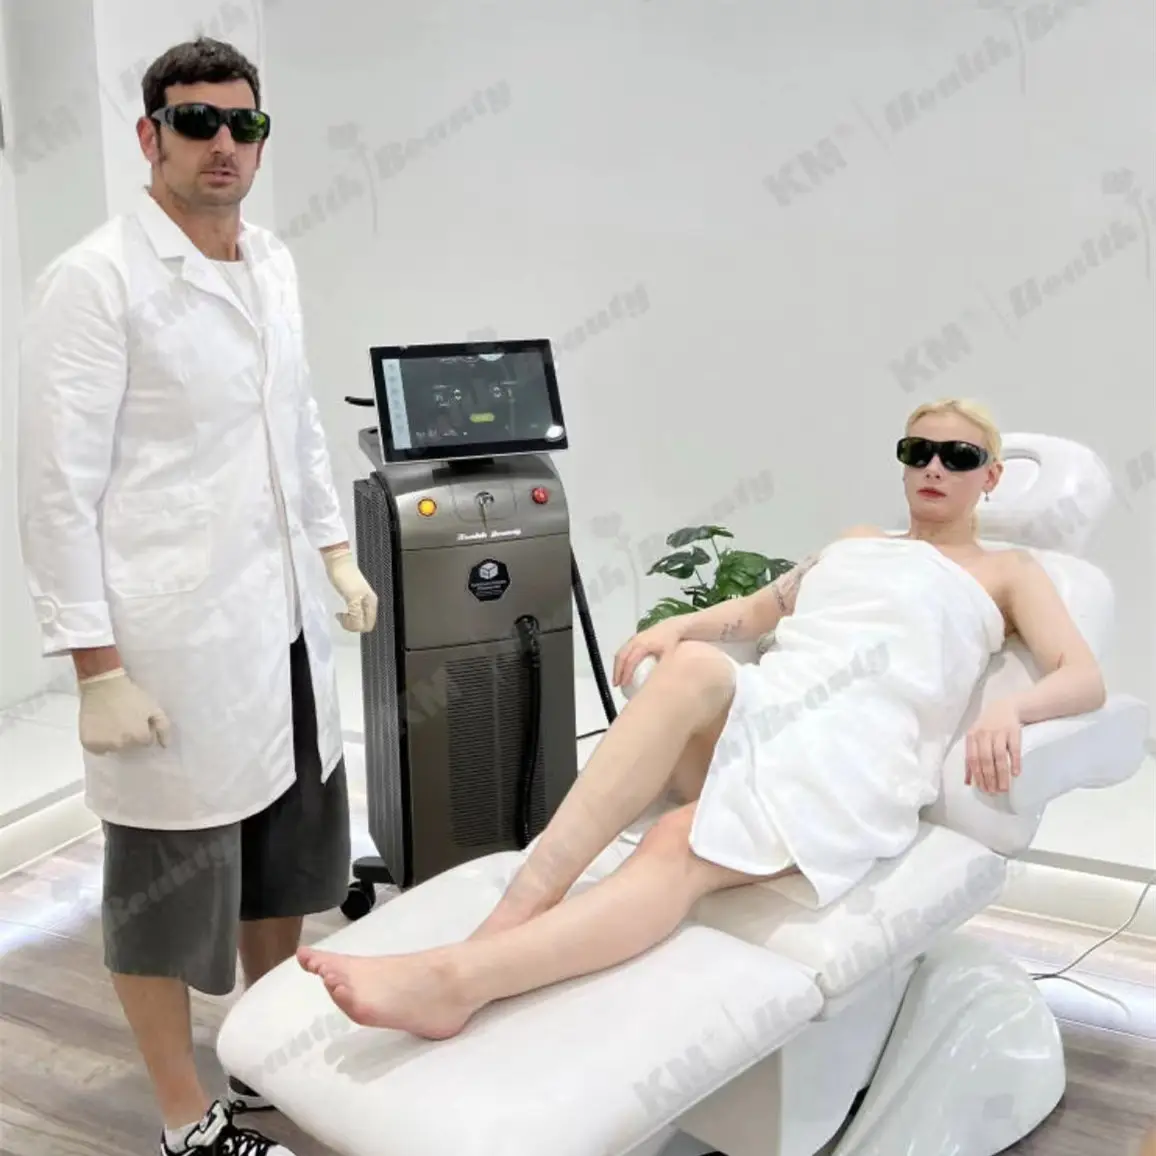 Powerful new 810 808nm ice diodo Trio 3 wave diode laser 810nm depilation 808 nm hair removal 4 waves titanium medical machine